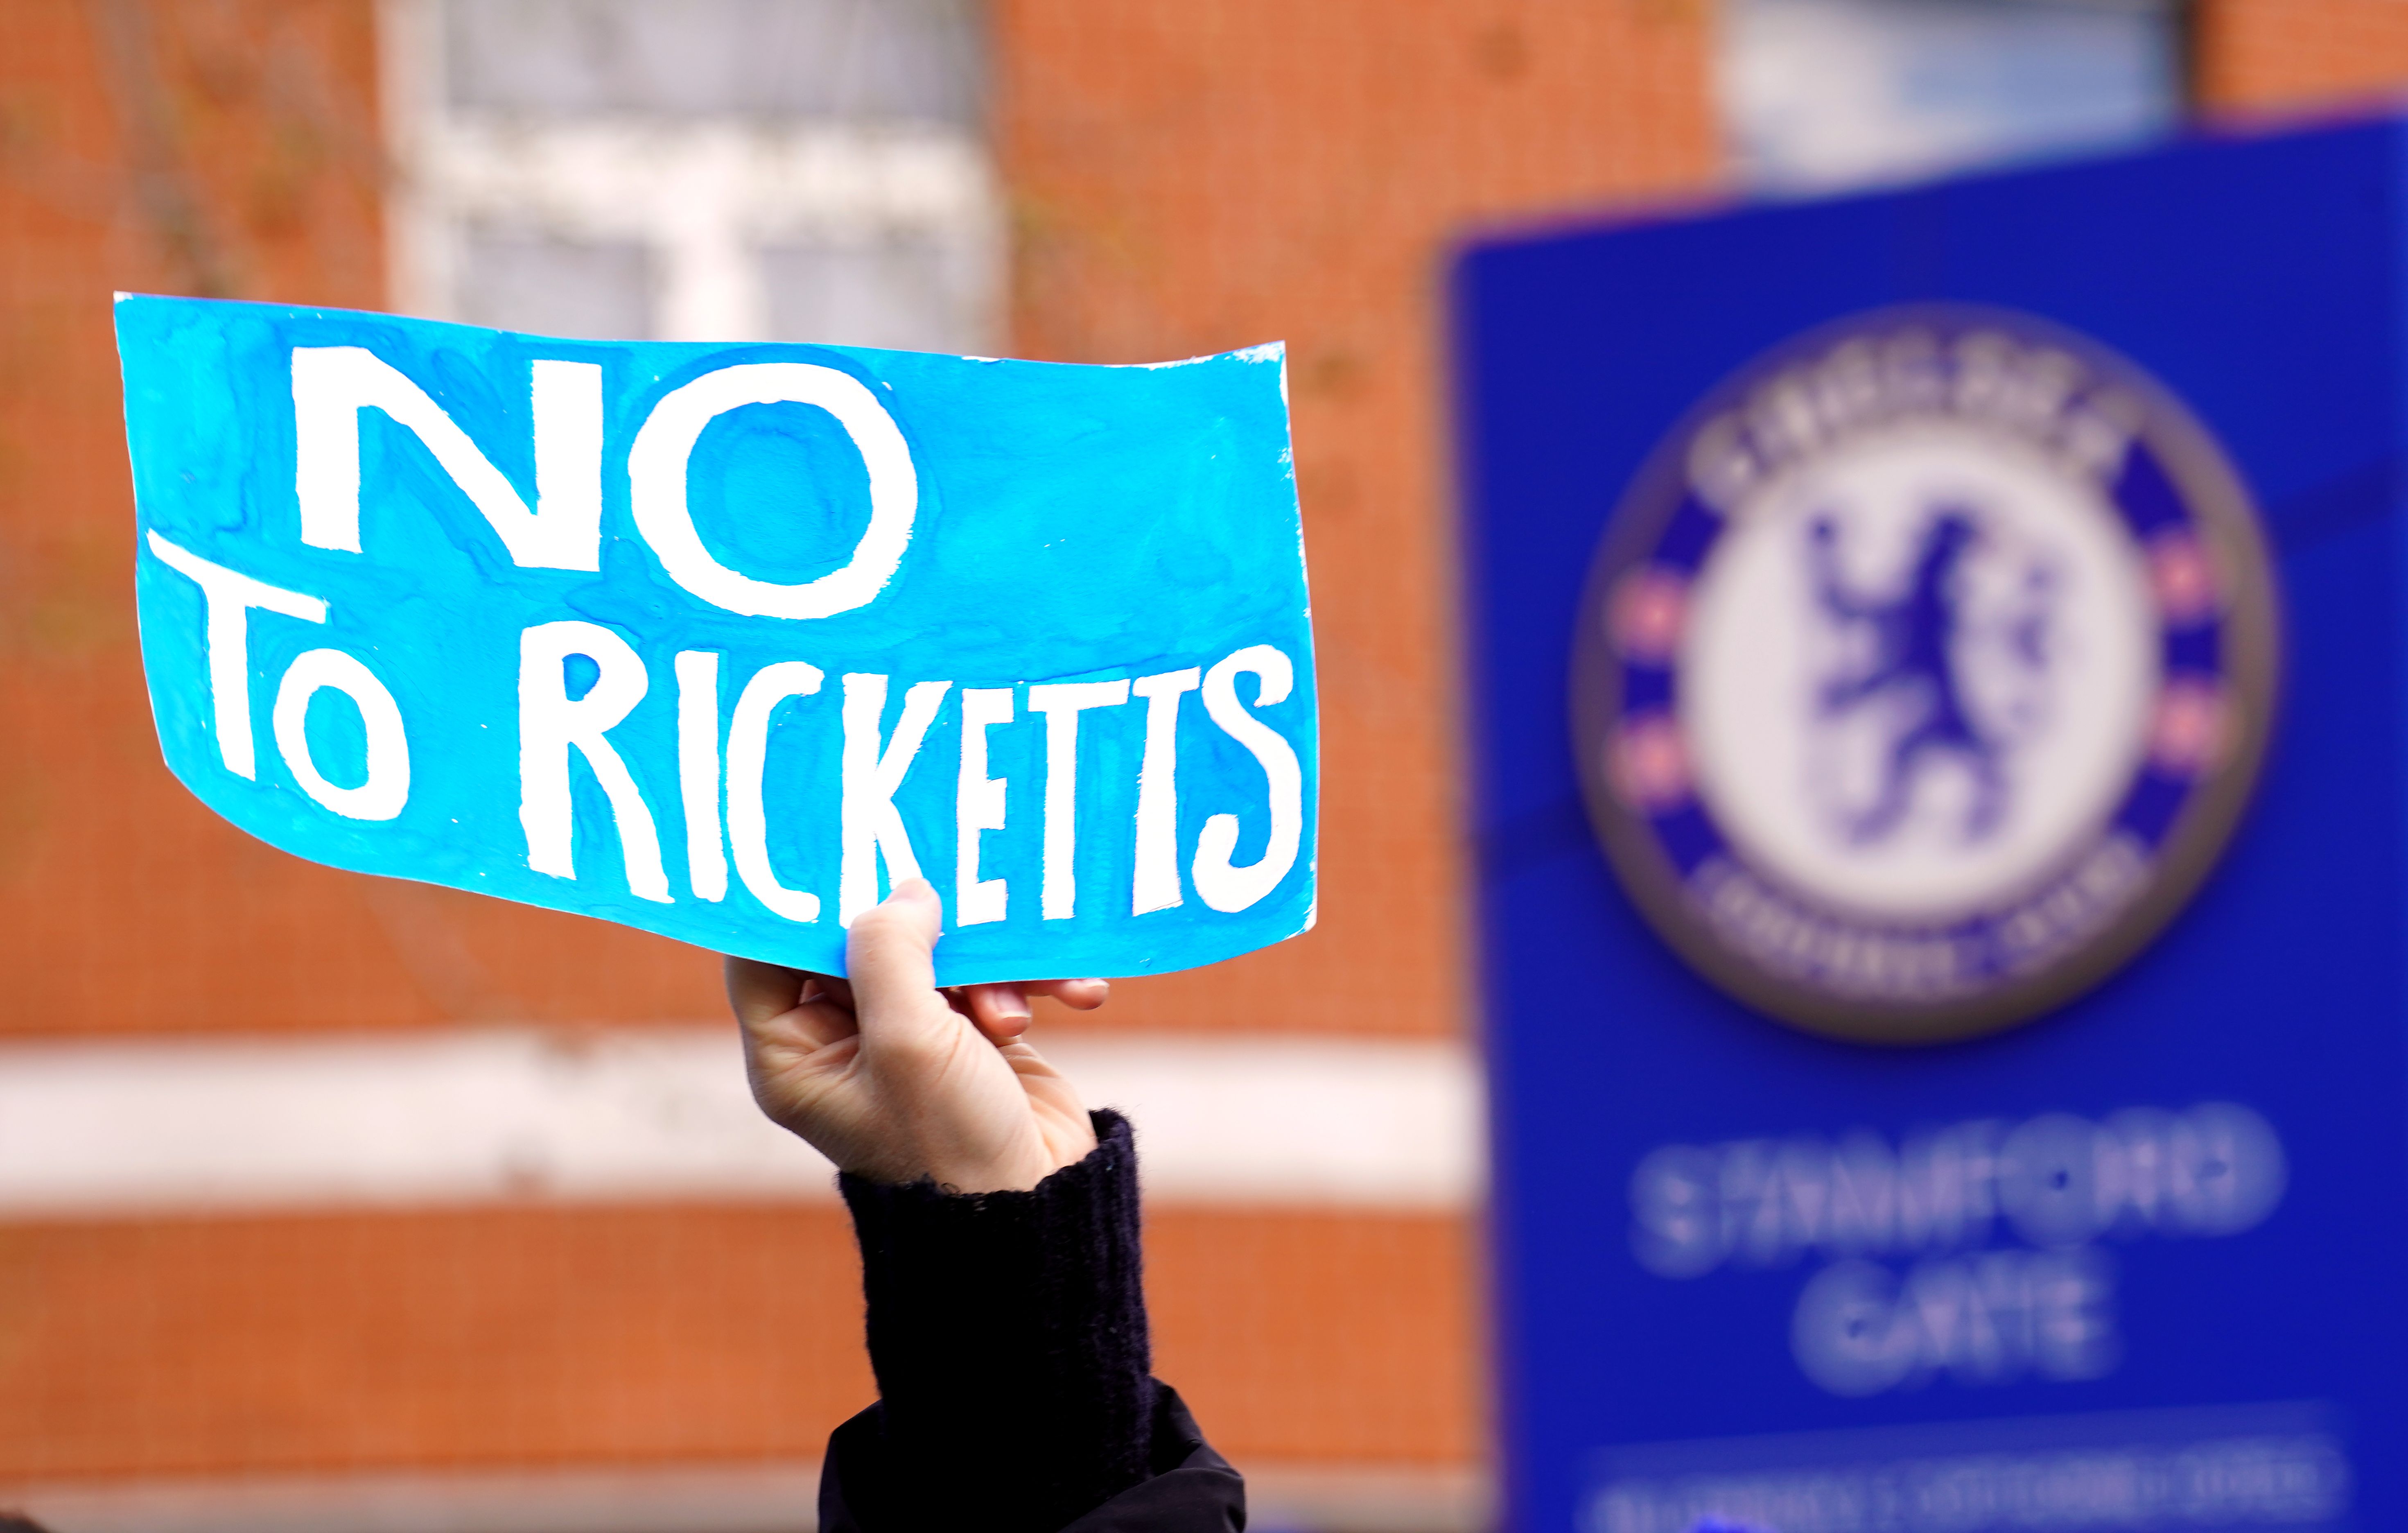 Chelsea fans said 'no to Rickets' before the bid was withdrawn